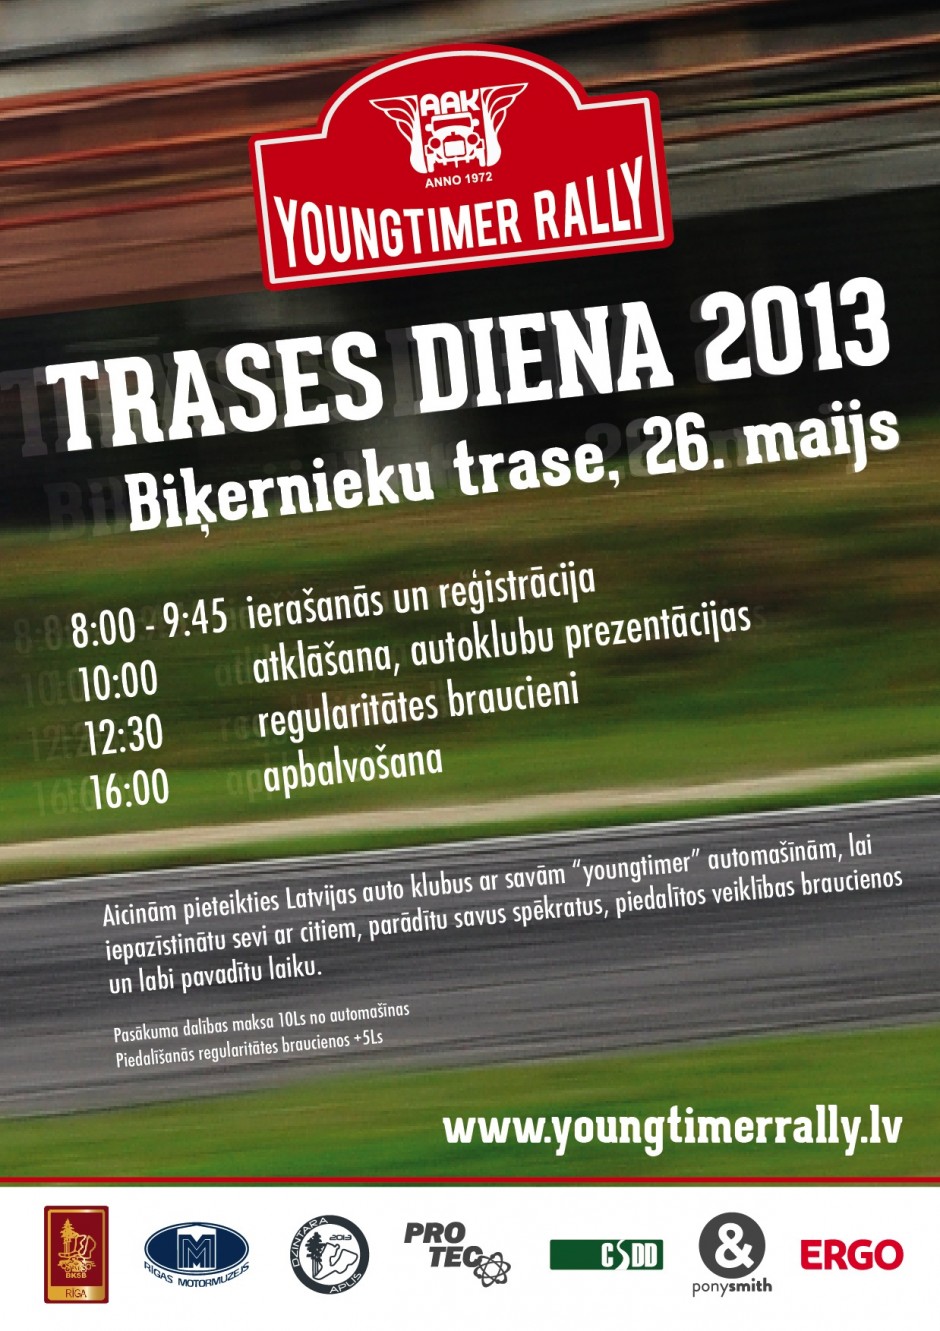 Youngtimer Rally Trases diena